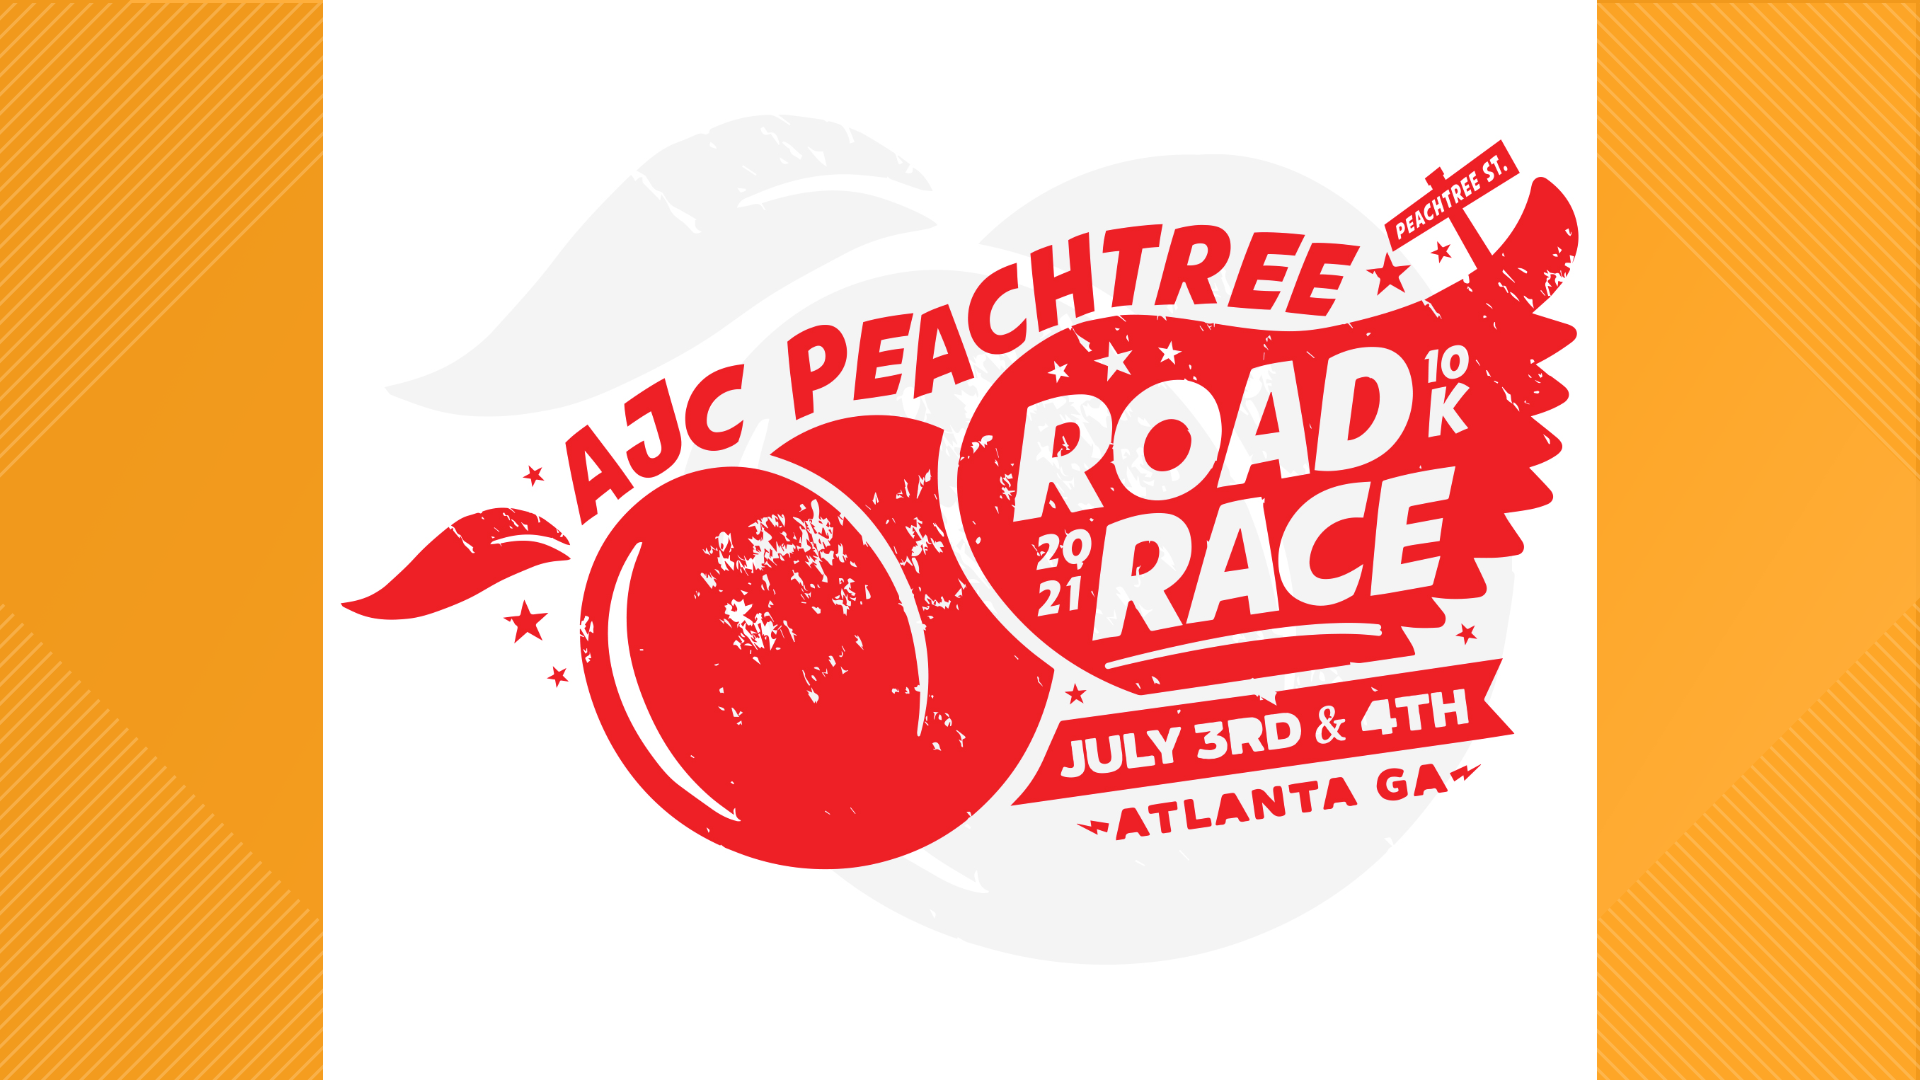 Voting for 2021 AJC Peachtree Road Race T shirt contest finalists